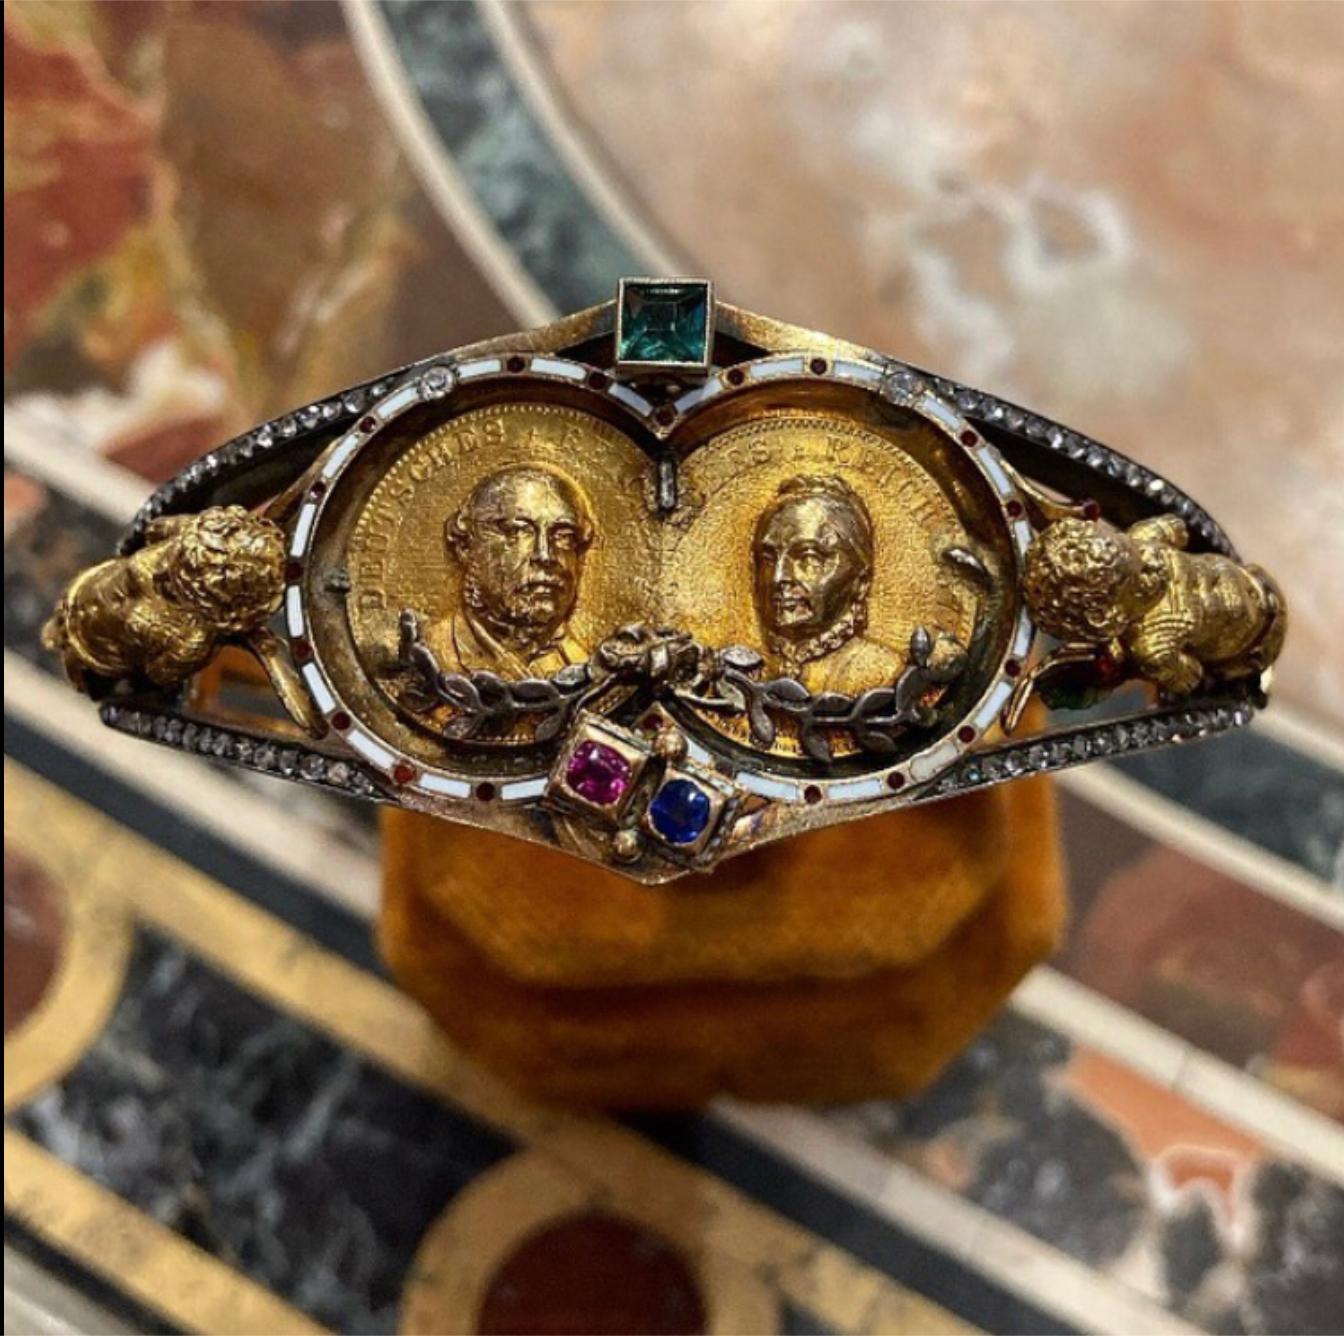 A beautiful antique bracelet in yellow gold and enamel with diamonds, emerald, rubies, and blue sapphire. The bracelet is inscribed  